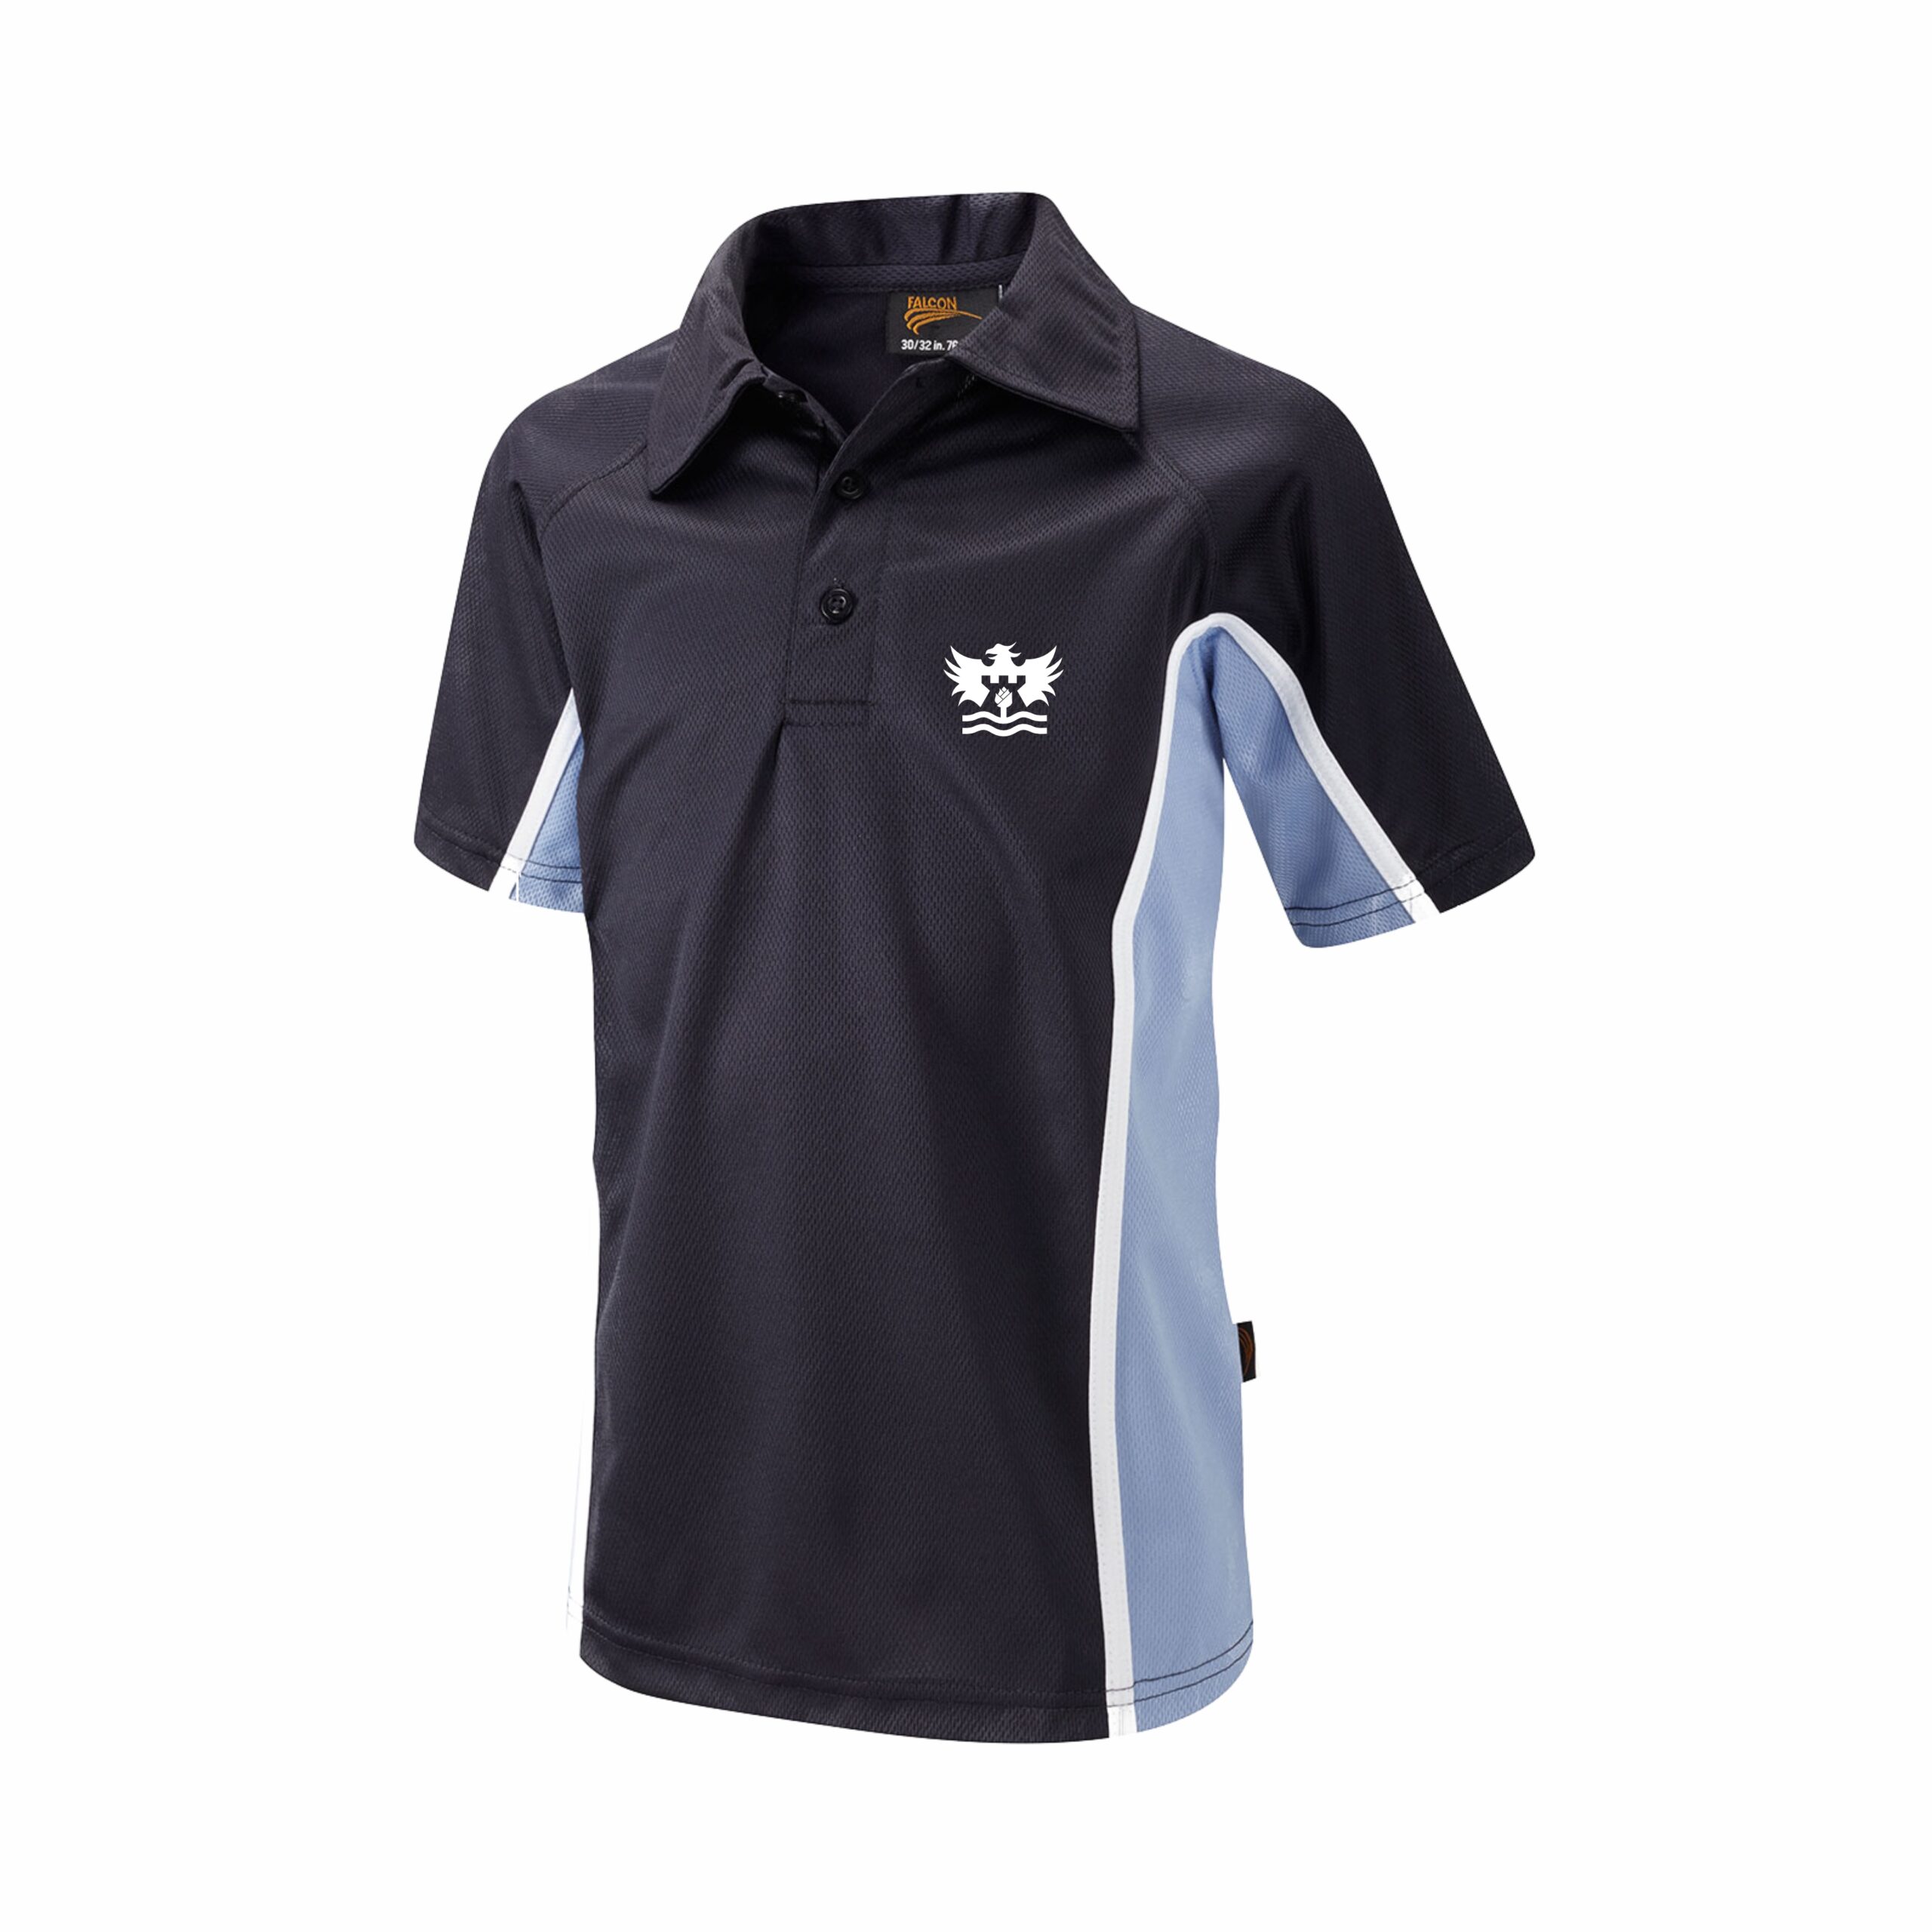 Unisex Sports Polo CDCC